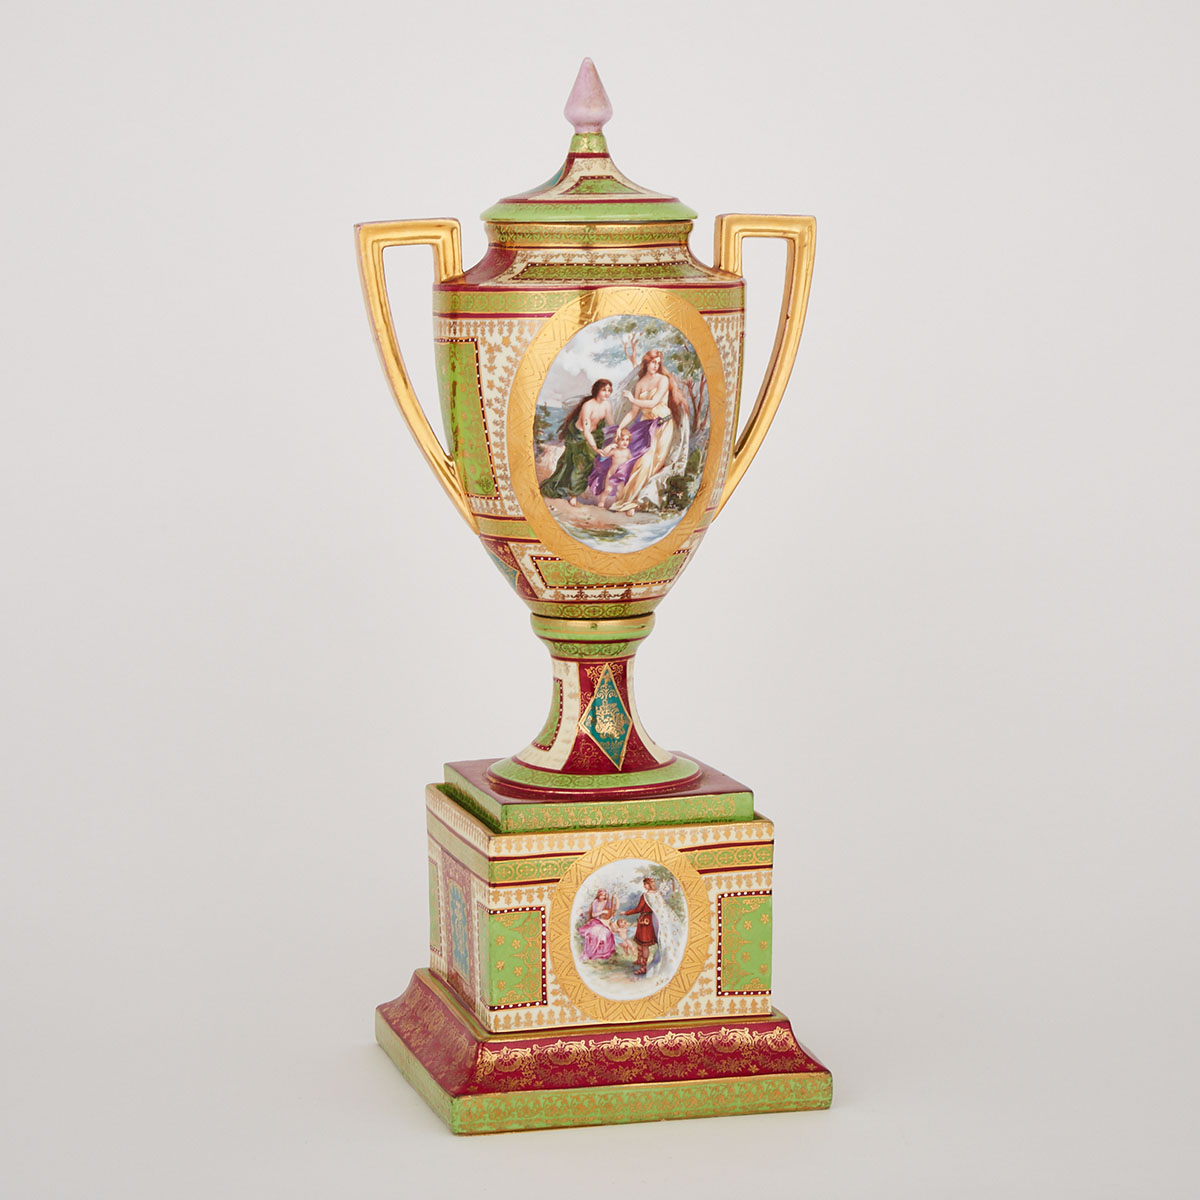 ‘Vienna’ Two-Handled Vase with Cover, c.1900